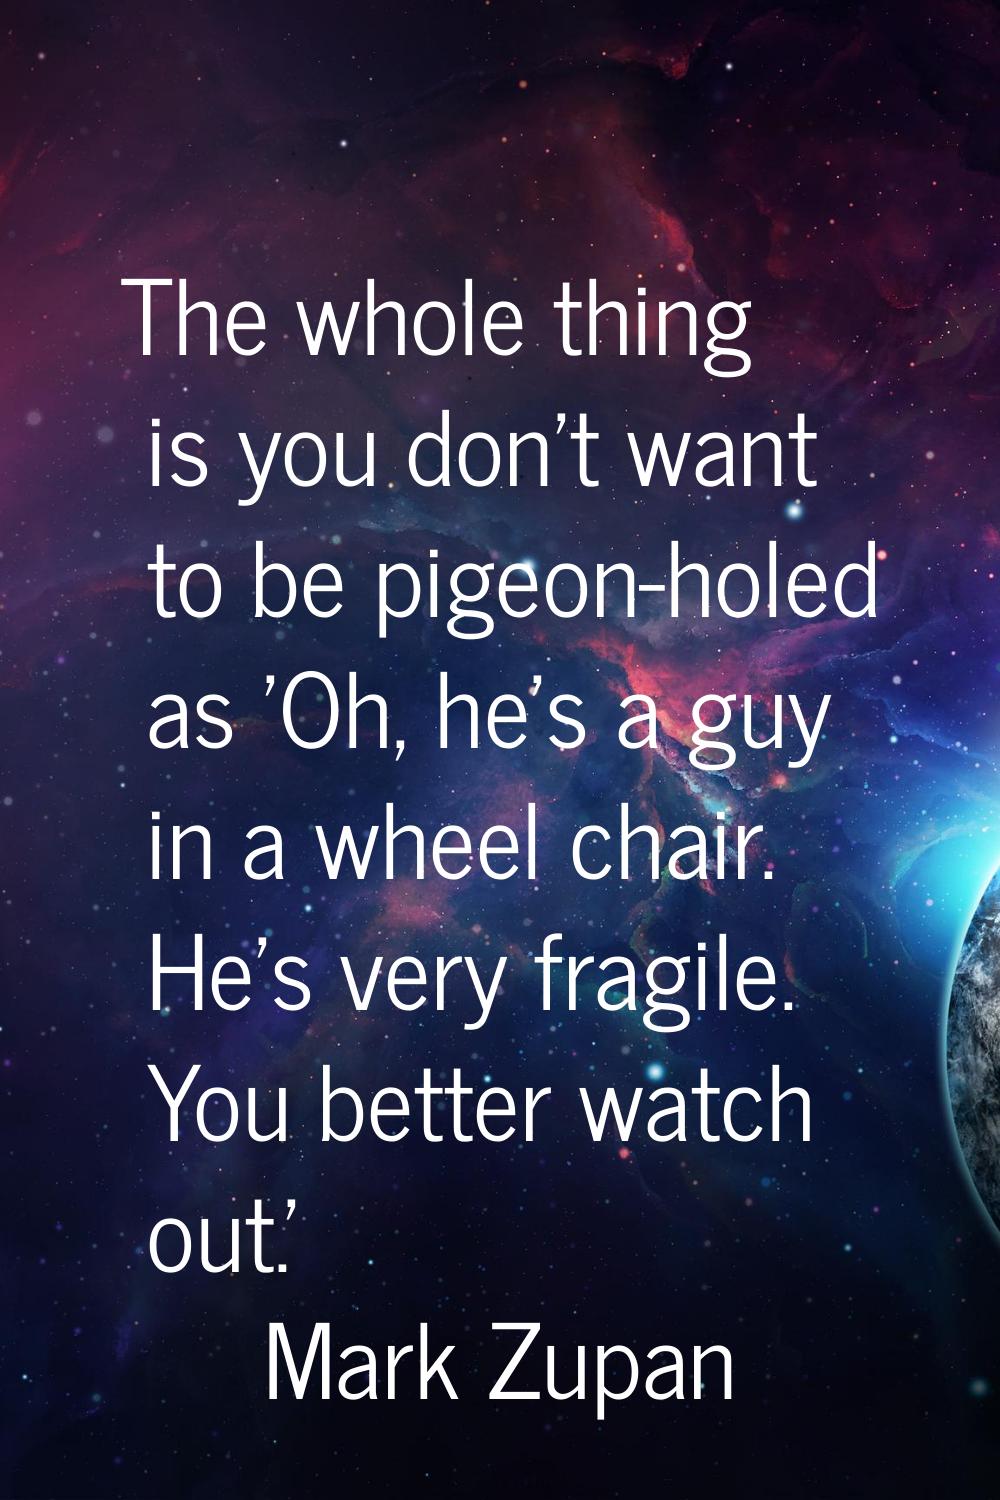 The whole thing is you don't want to be pigeon-holed as 'Oh, he's a guy in a wheel chair. He's very